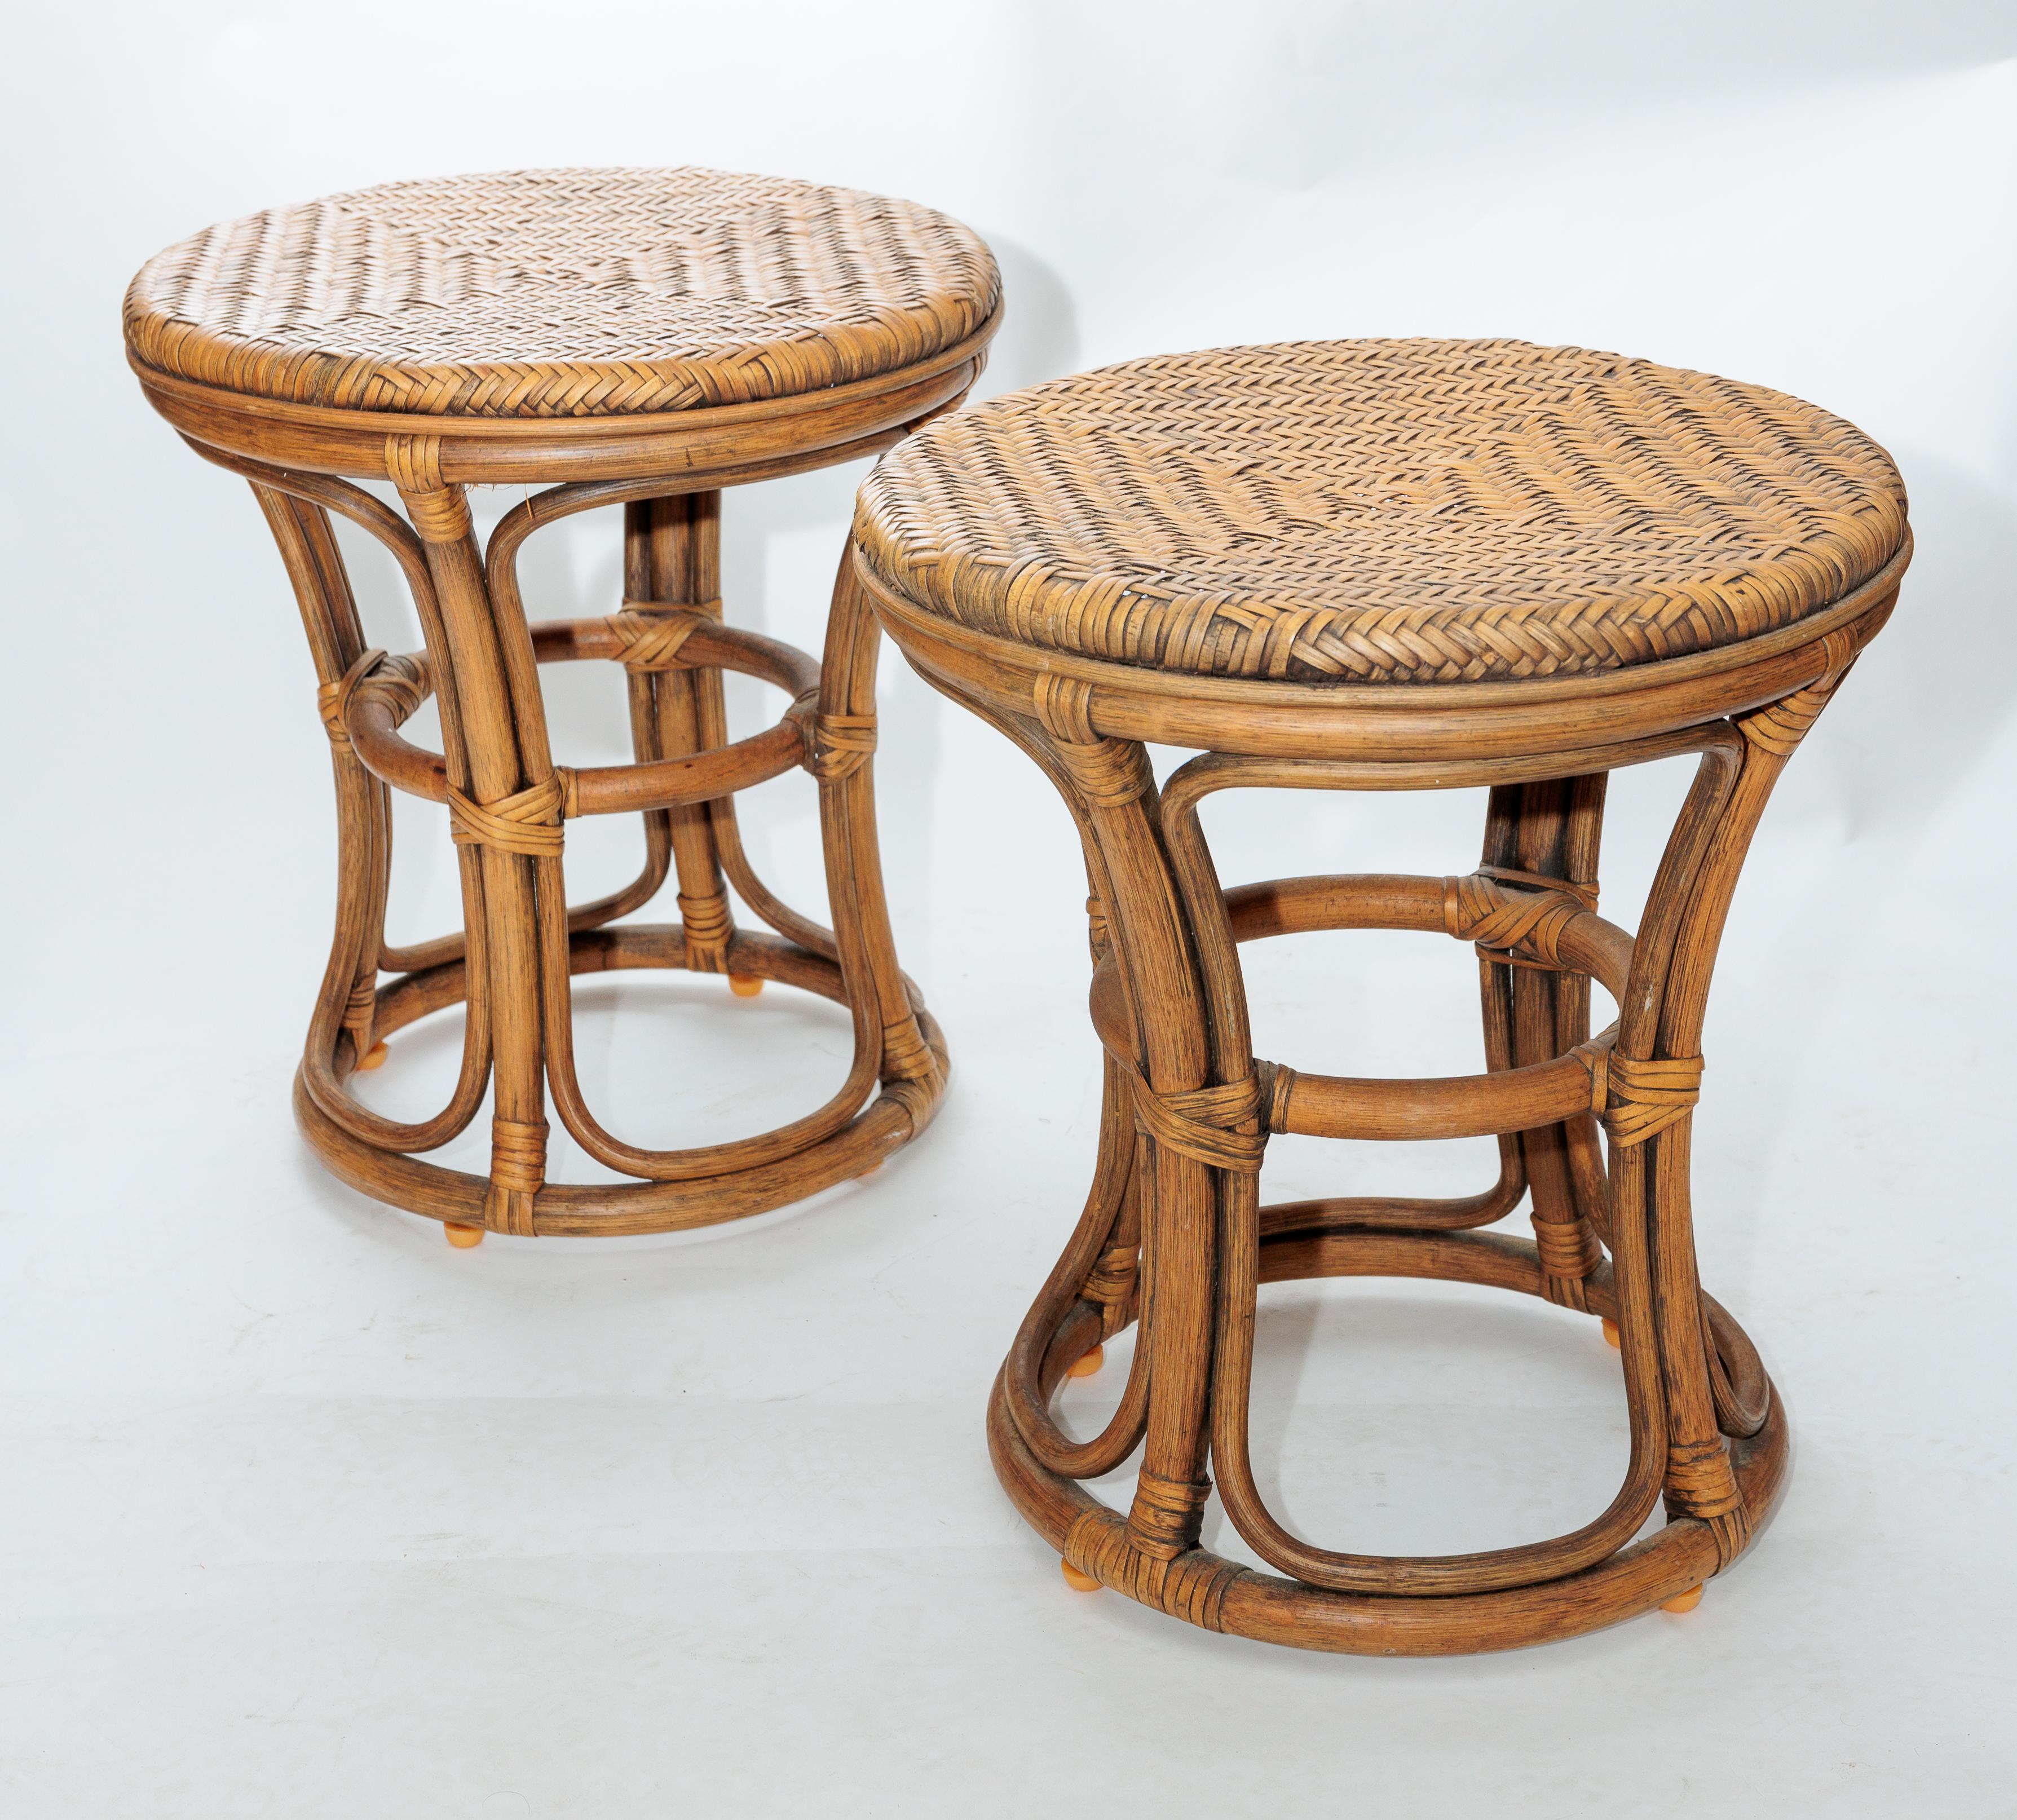 The stools are in great condition. Bamboo and rattan have been popular, the stools will become a segway for natural elements in any space.